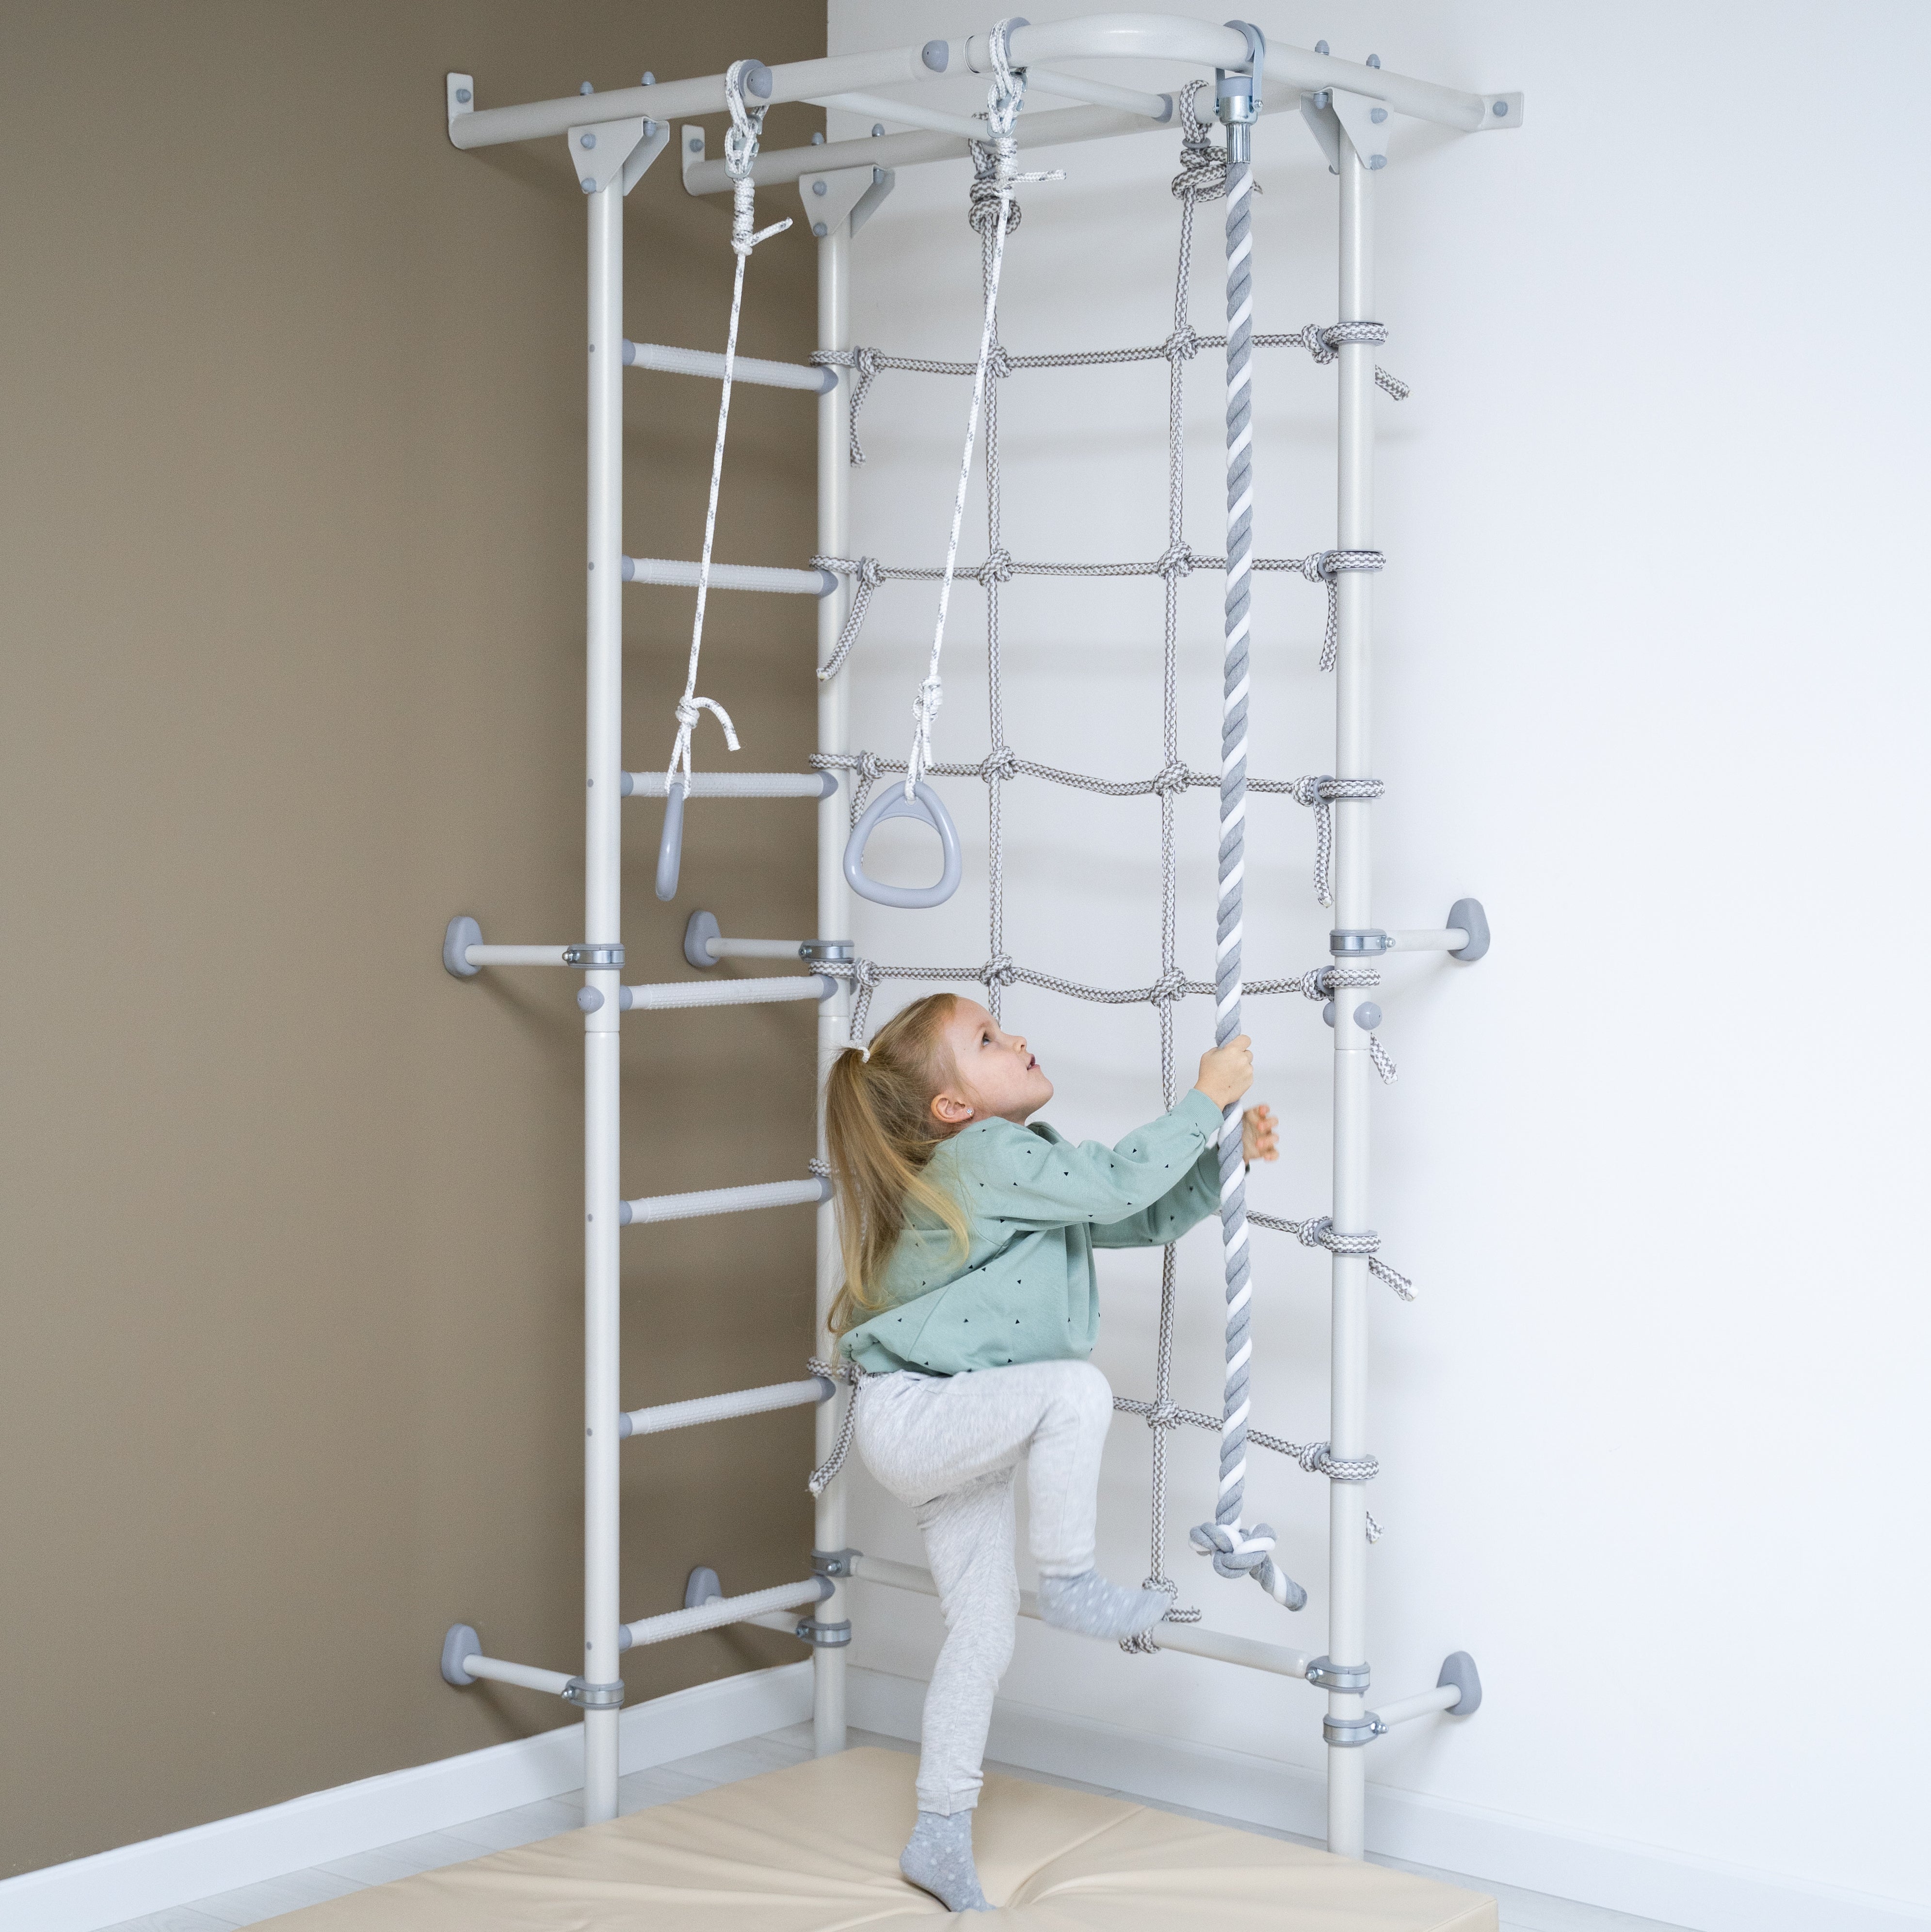 Monkey bars, gymnastics rings, spider net and climbing frame for kids in home play gyms.